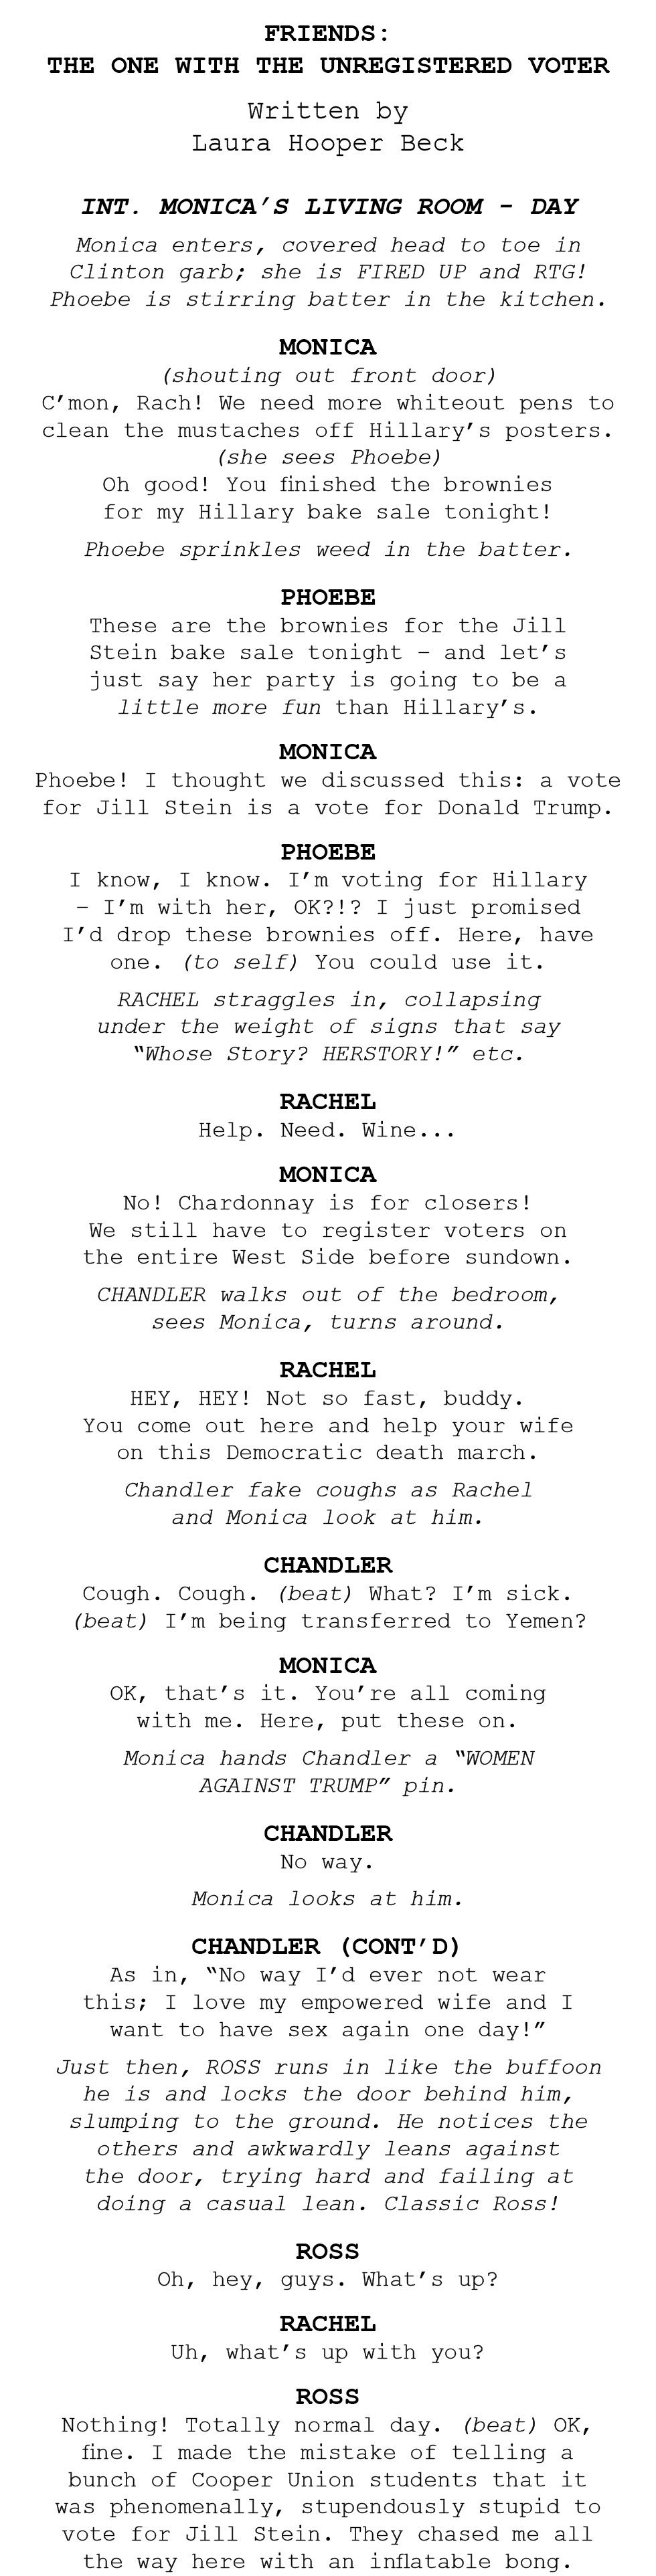 If the 2016 Election Were an Episode of Friends